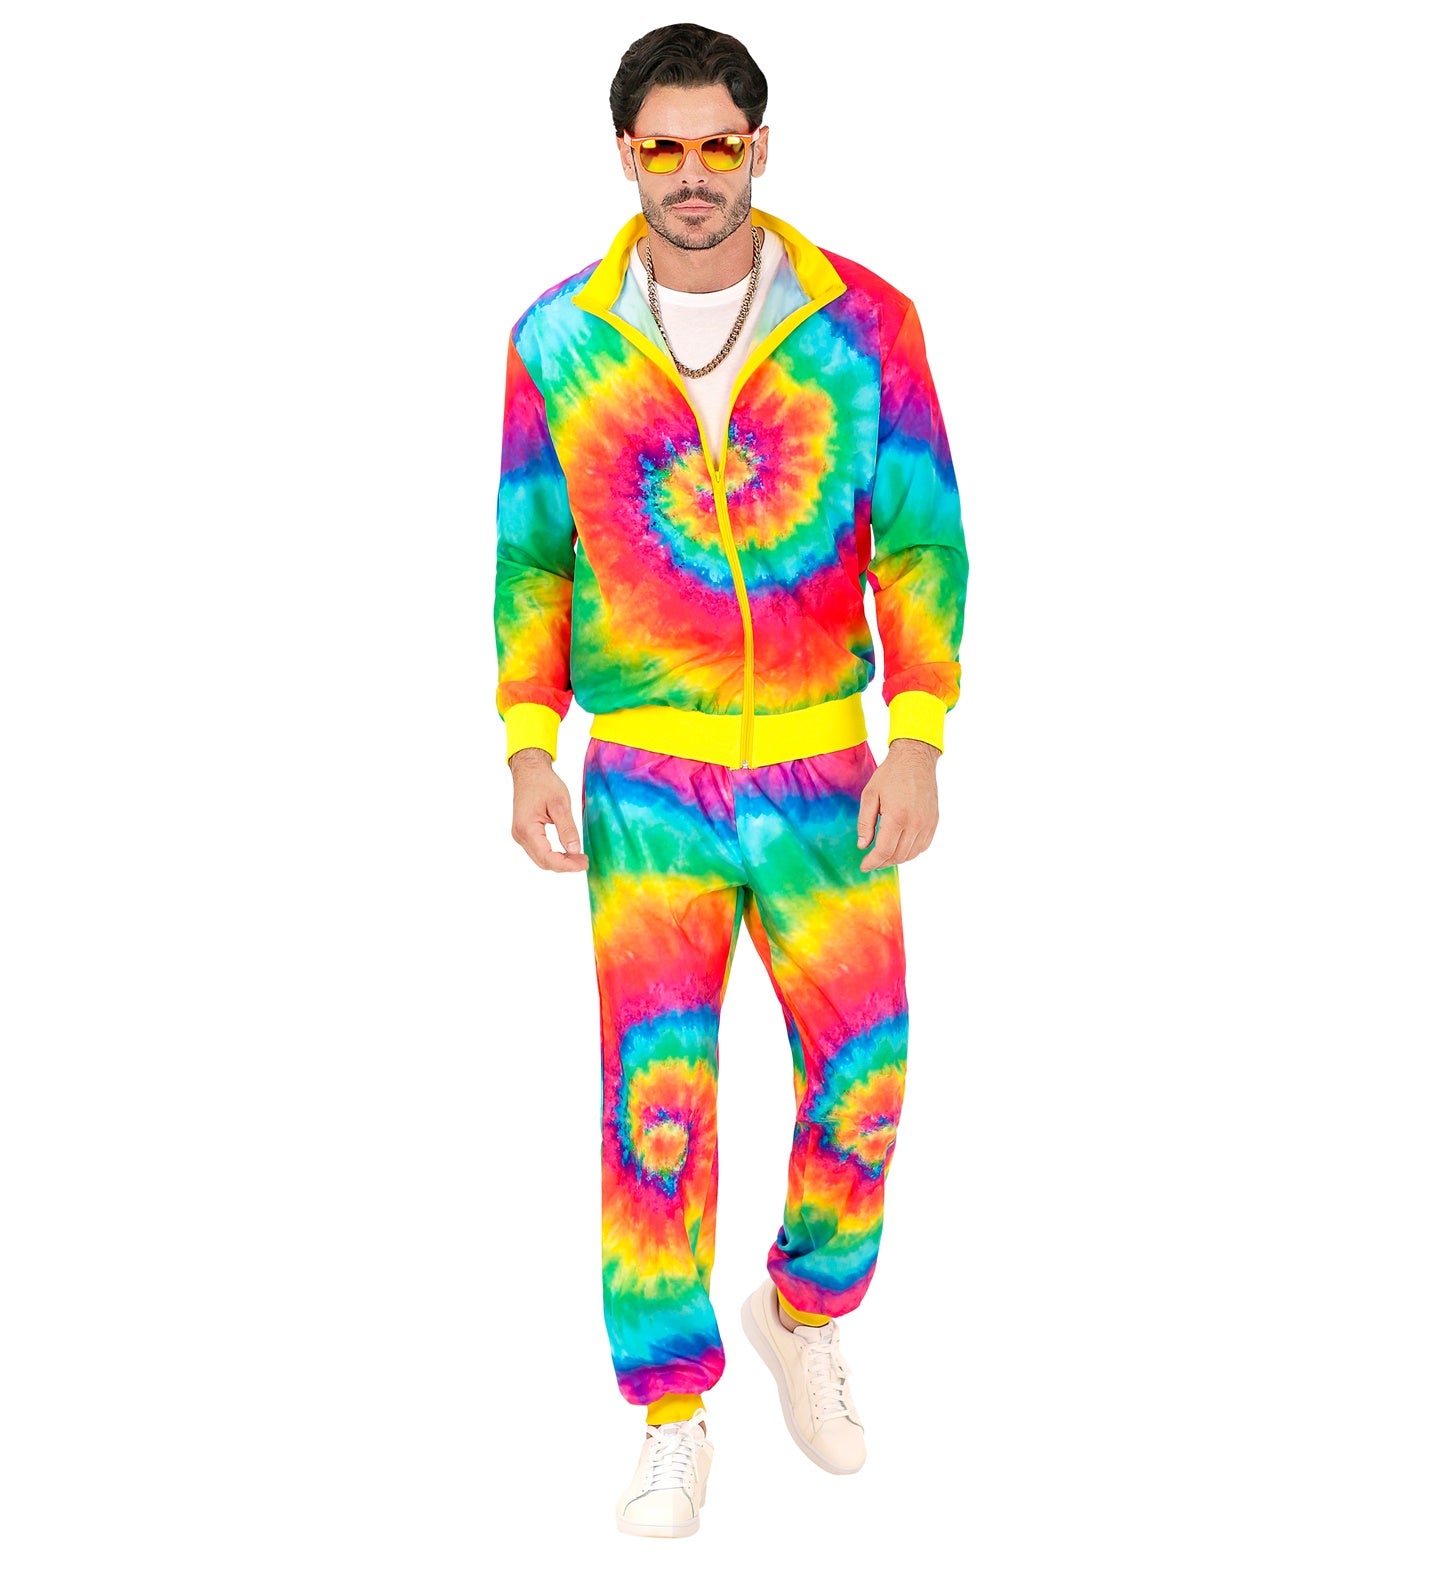 80's Neon Tie Dye Psychedelic Tracksuit costume for men